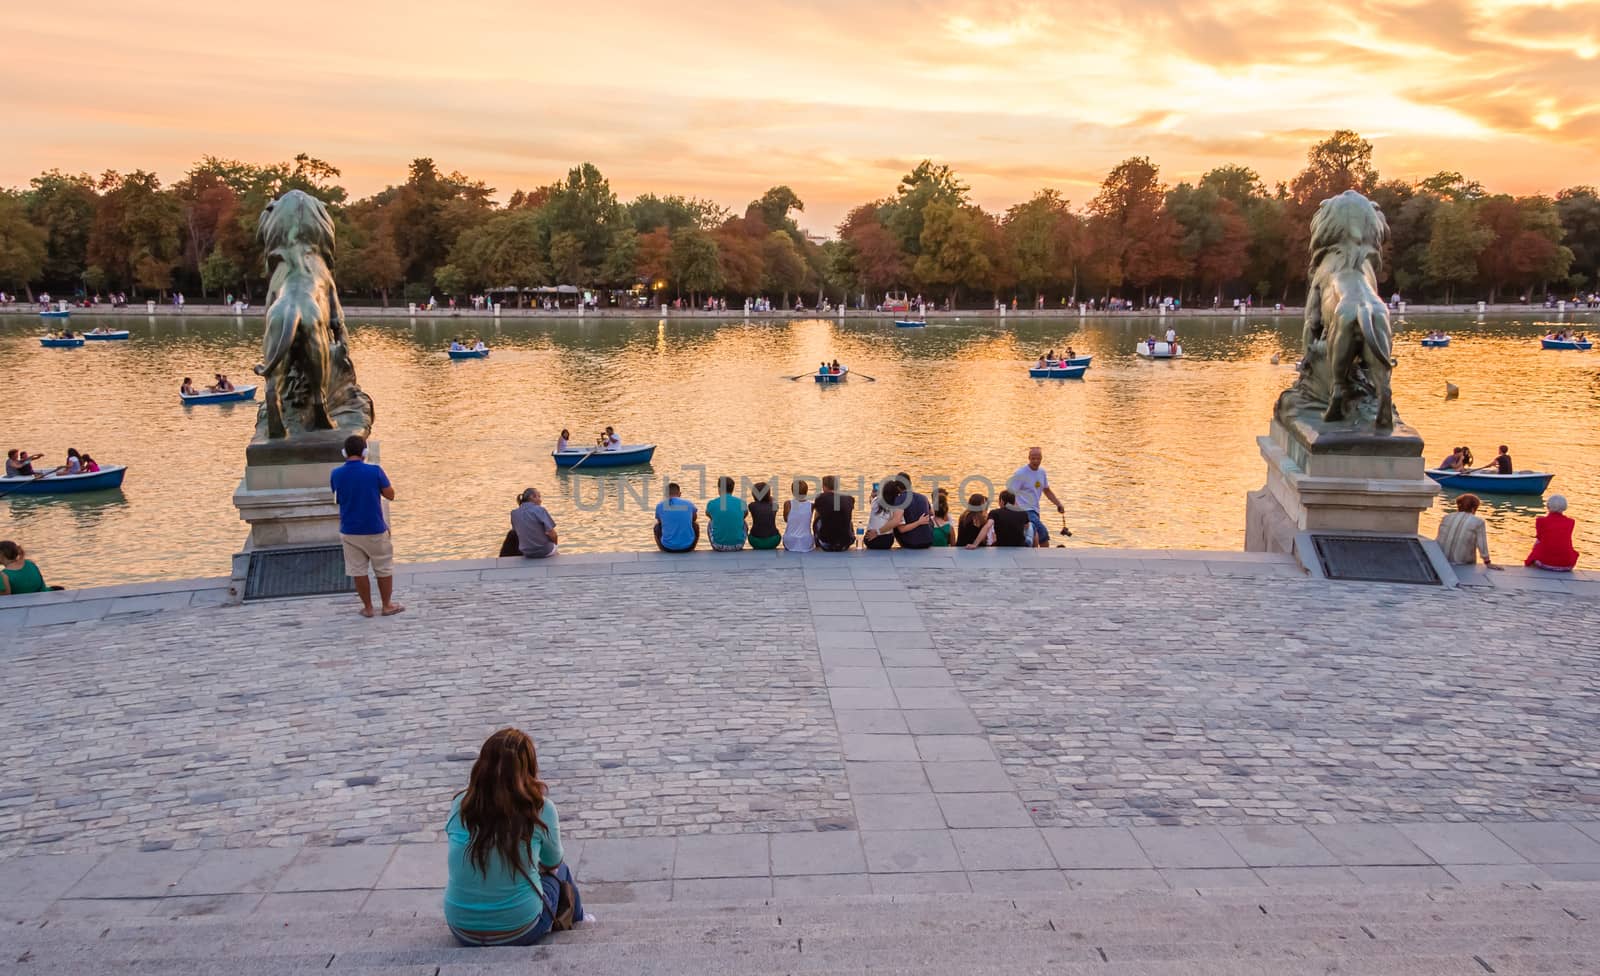 Madrid, Spain - September 02, 2013: People watching sunset in front of Buen Retiro park lake, sitting on the monument stairs to Alfonso XII, Madrid, Spain